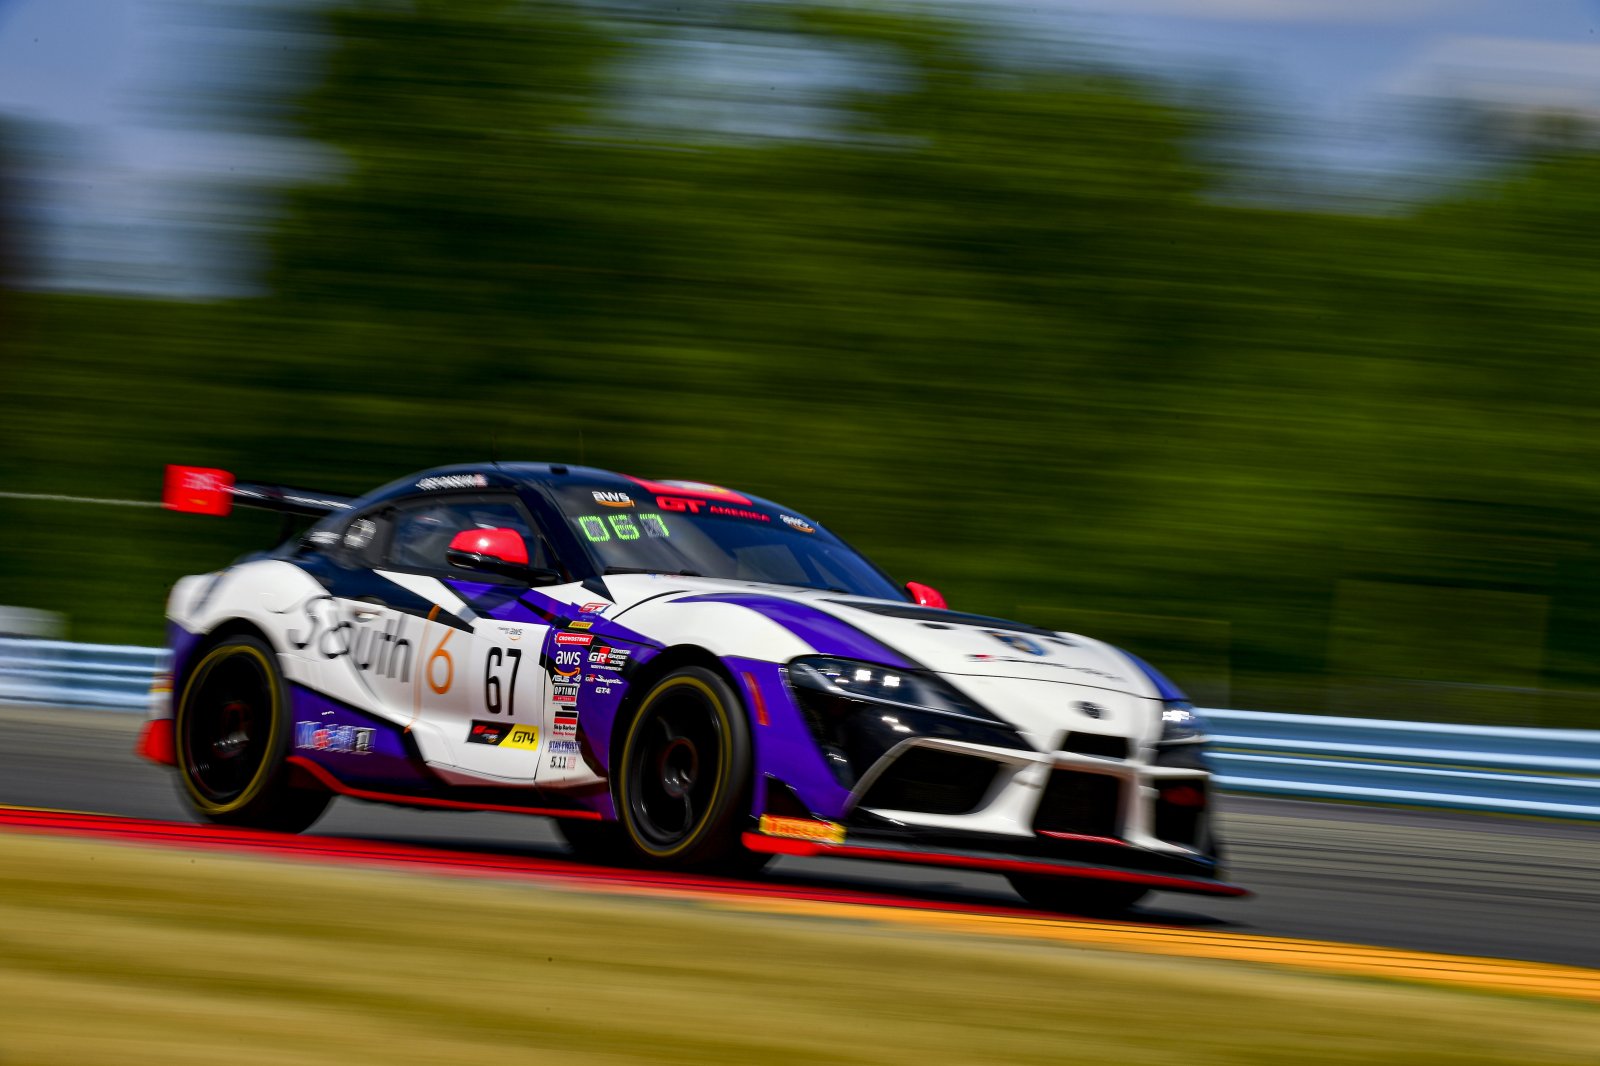 TRD DEVELOPMENT DRIVER ISABELLA ROBUSTO JOINS SMOOGE RACING FOR SRO GT4 AMERICA CHAMPIONSHIP